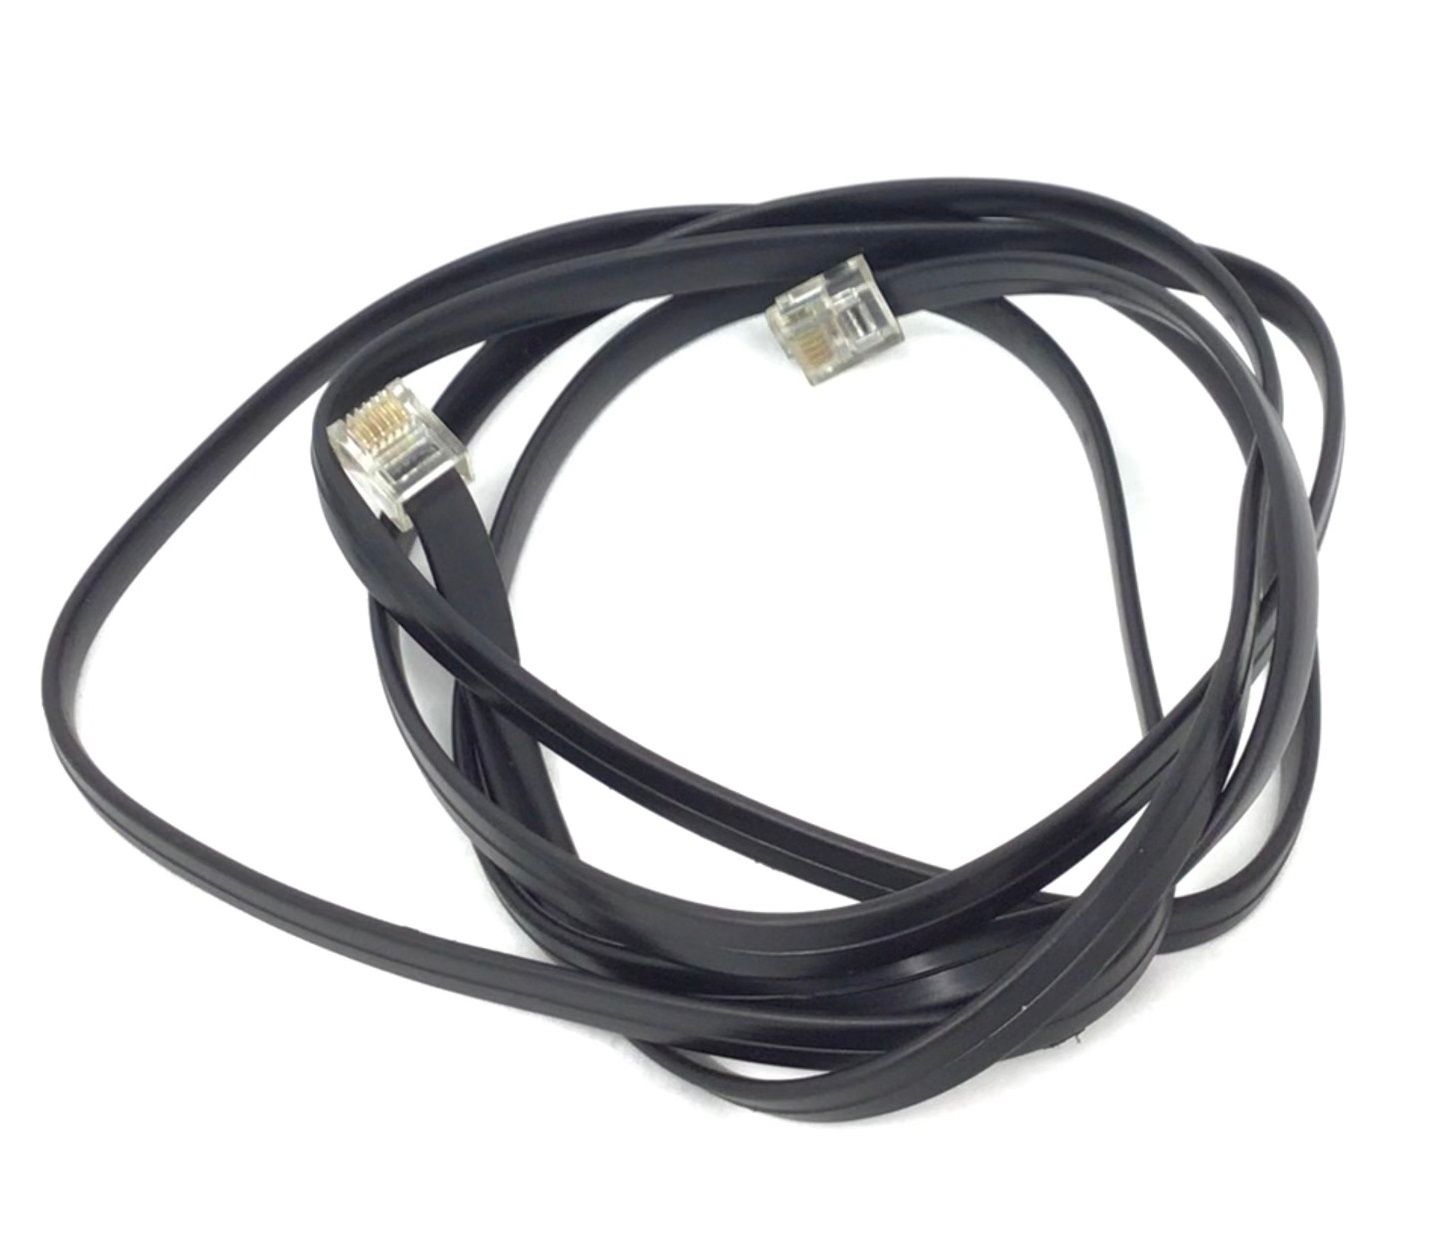 6 pin 62 Inch Data Cable Wire Harness